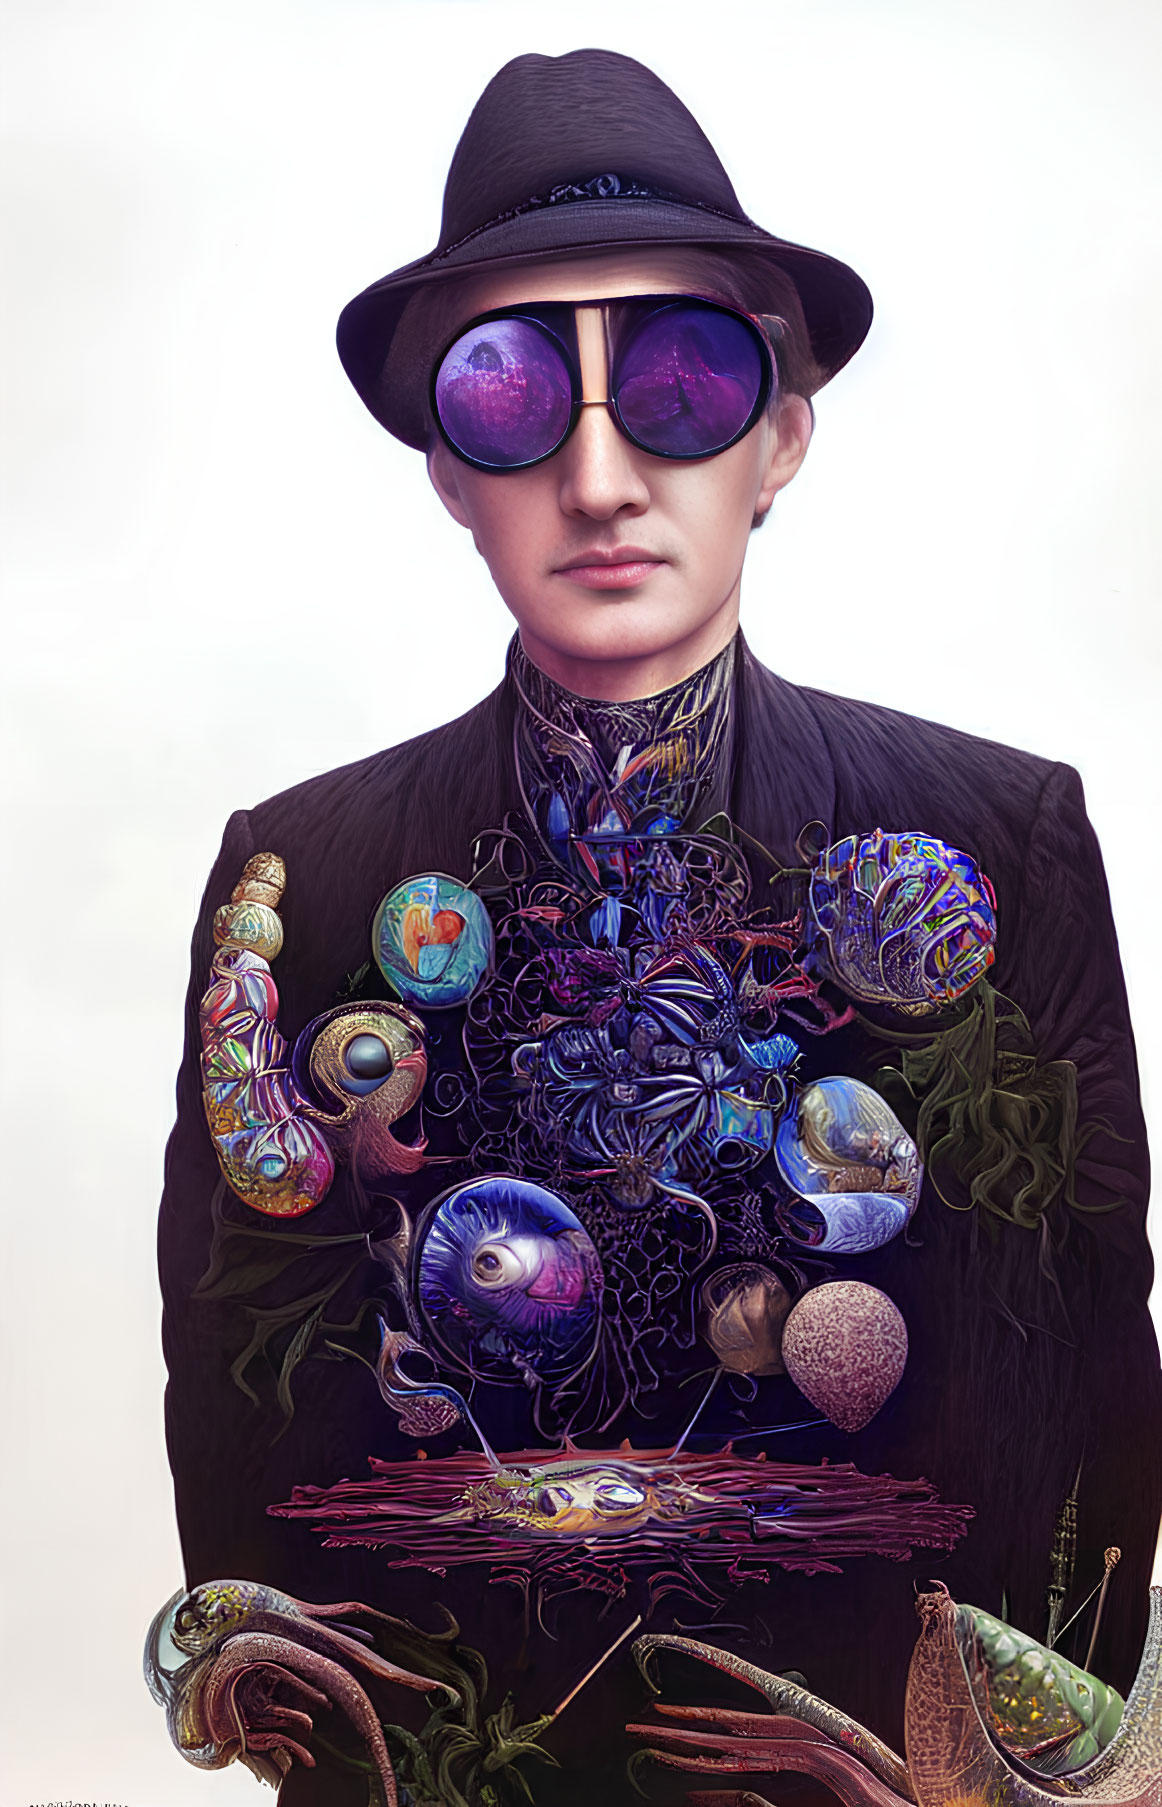 Surreal portrait featuring person with bowler hat and purple-tinted round glasses